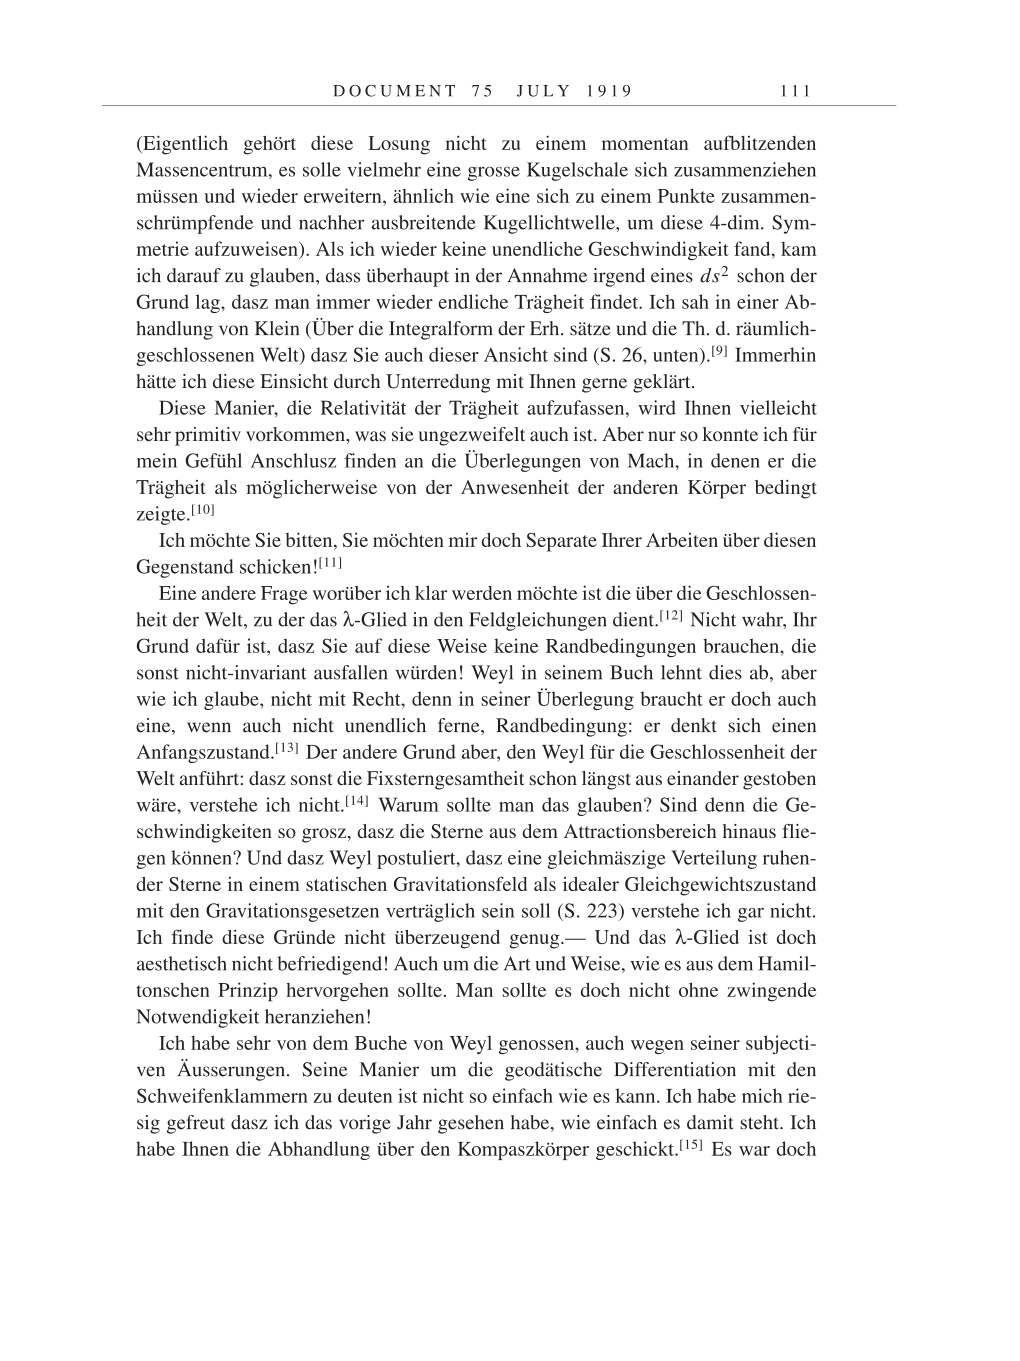 Volume 9: The Berlin Years: Correspondence January 1919-April 1920 page 111